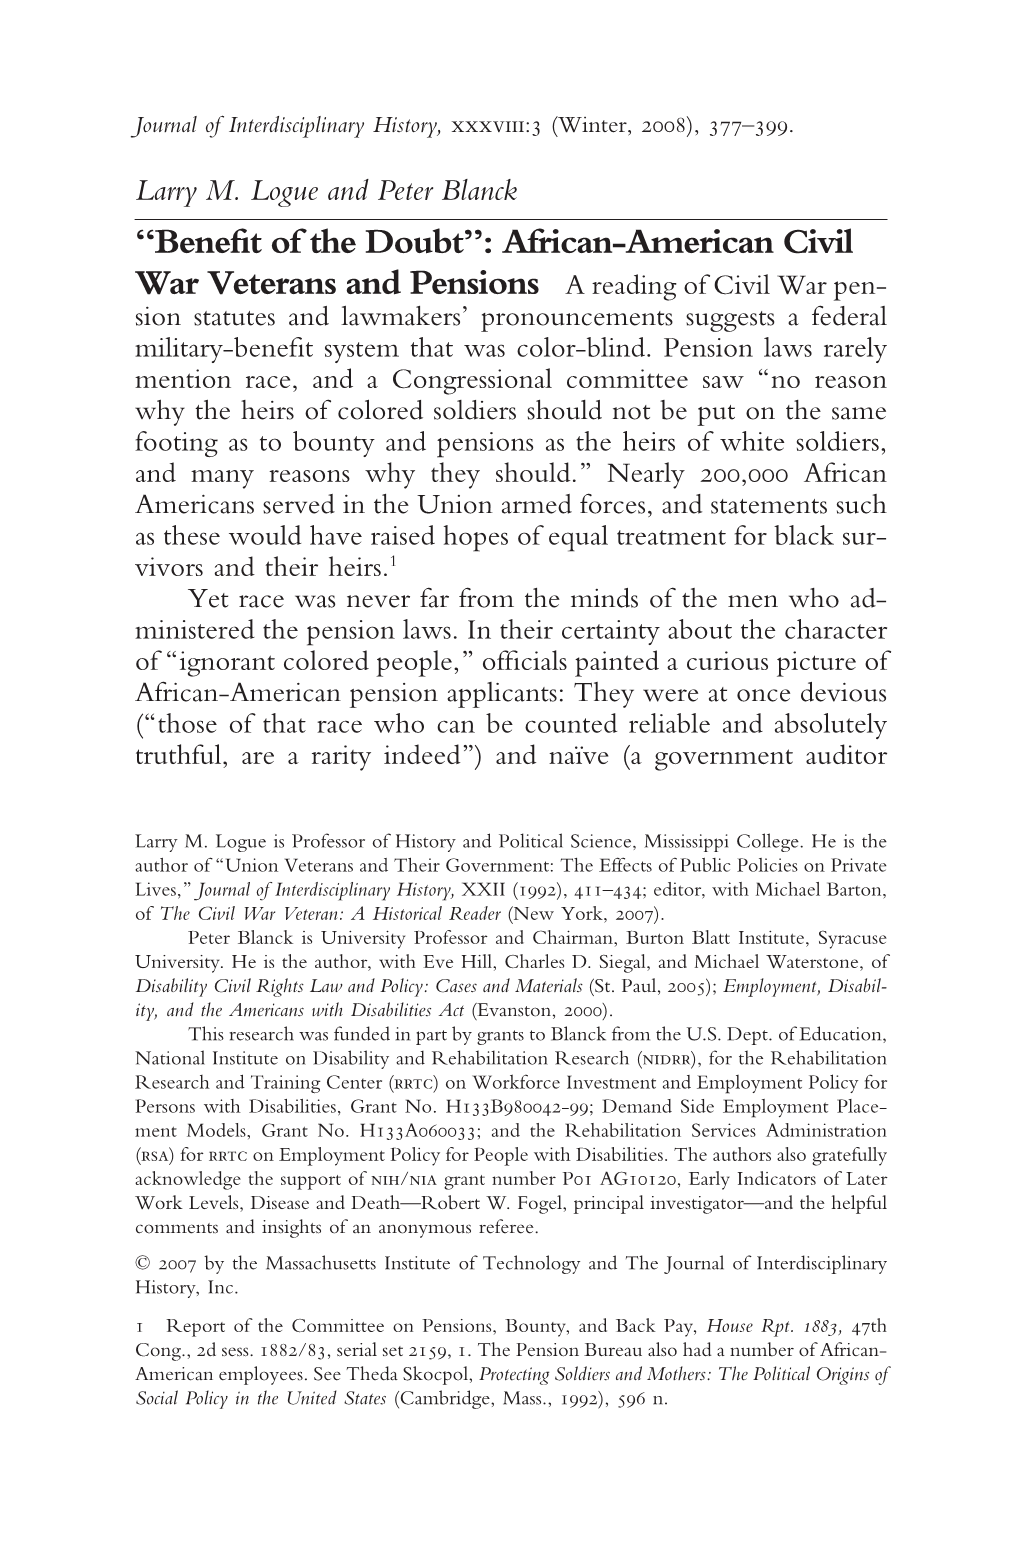 Benefit of the Doubt': African-American Civil War Veterans and Pensions